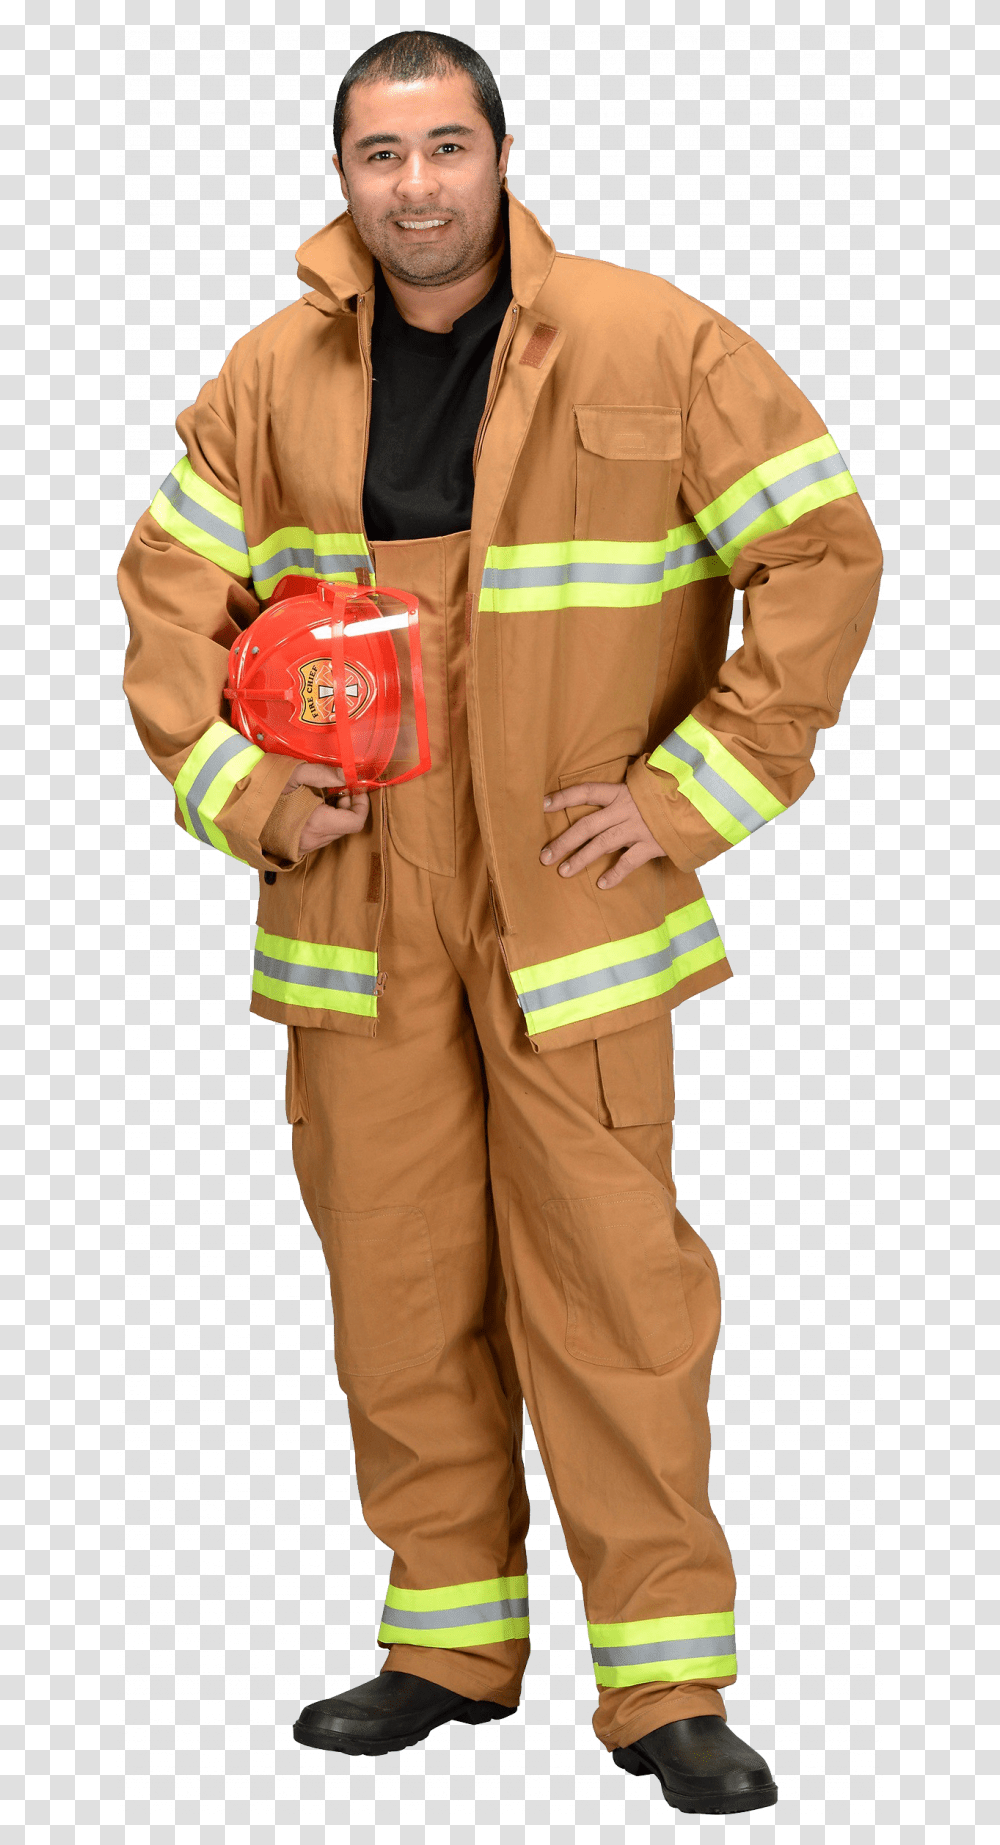 Download And Use Firefighter File Firefighter, Person, Human, Fireman Transparent Png